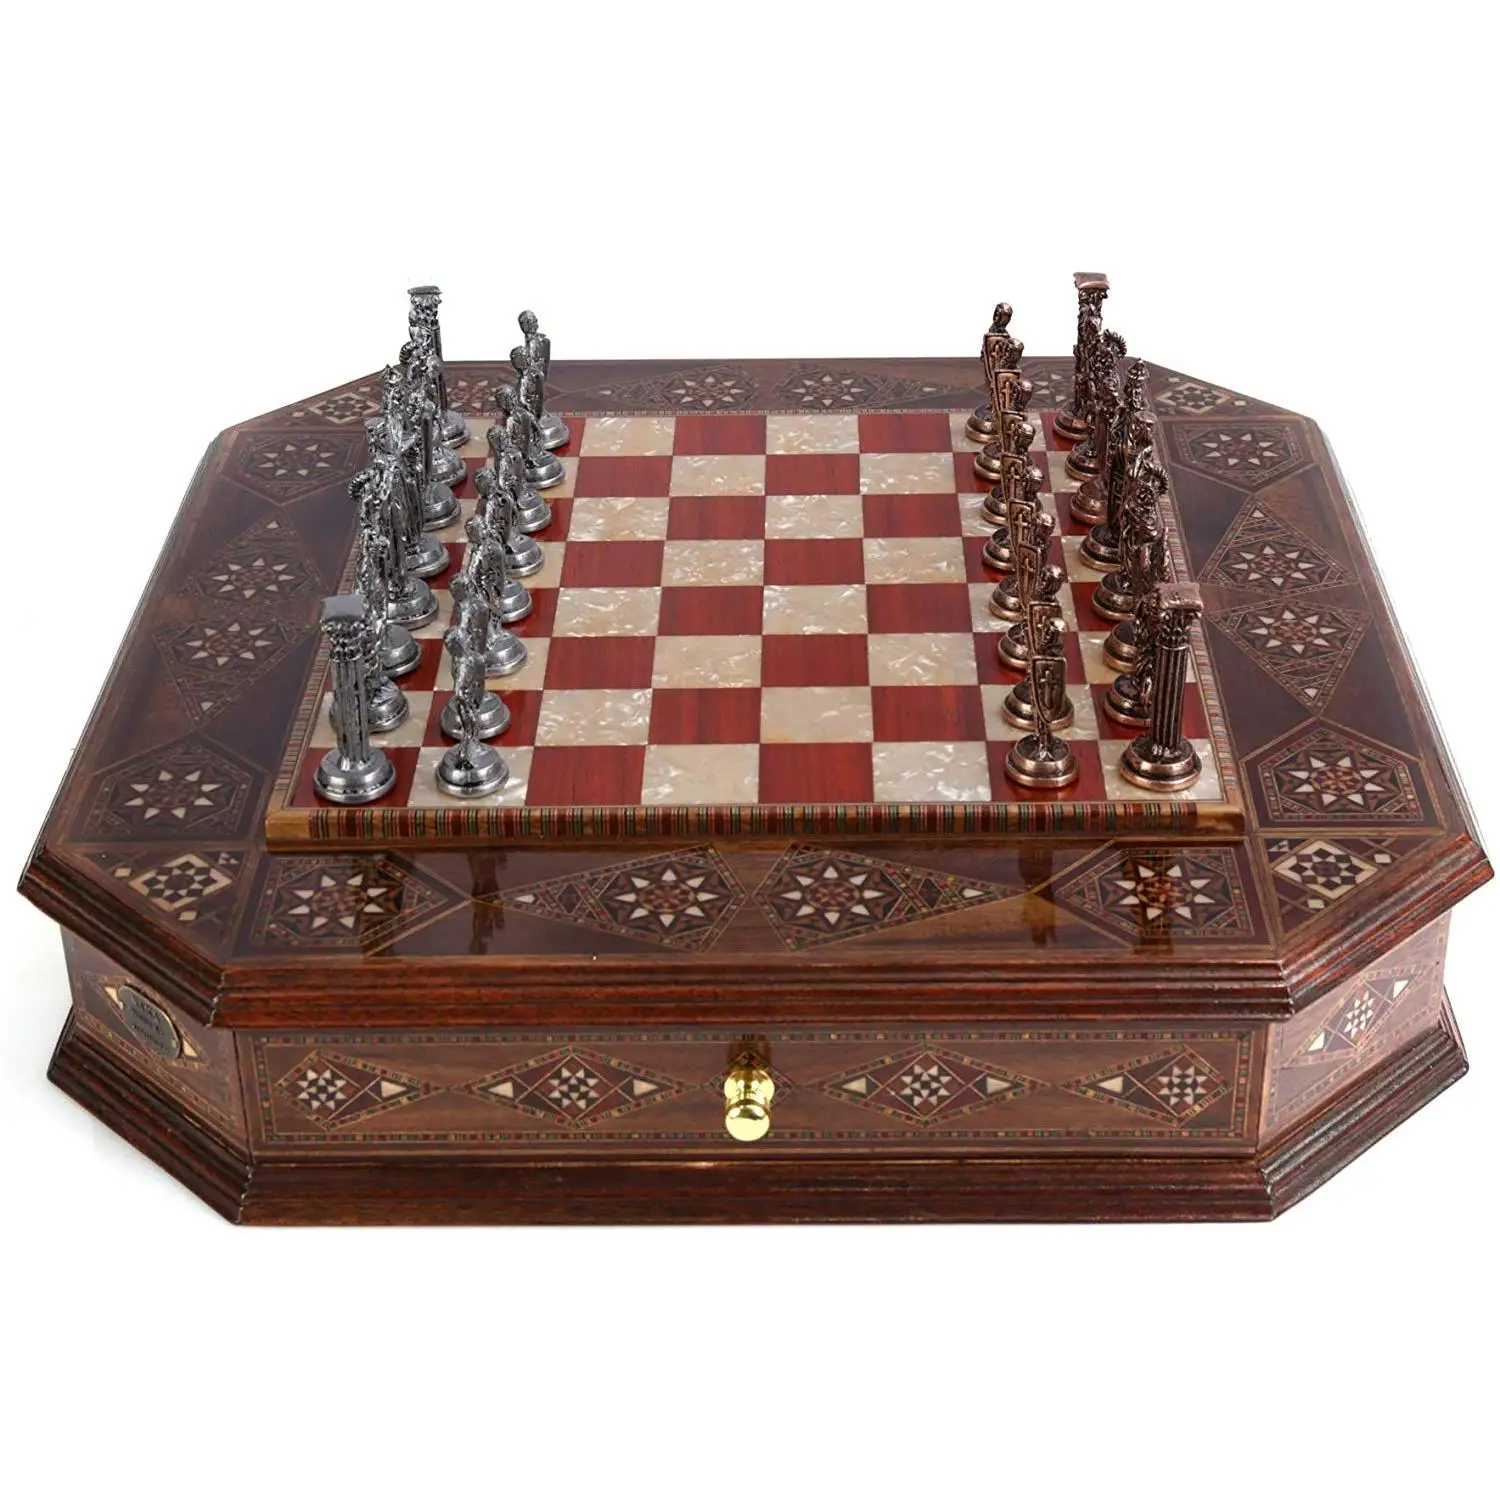 Metal Chess Set Royal Medieval British Army Antique Copper Handmade Pieces Natural Solid Wooden Rose Board